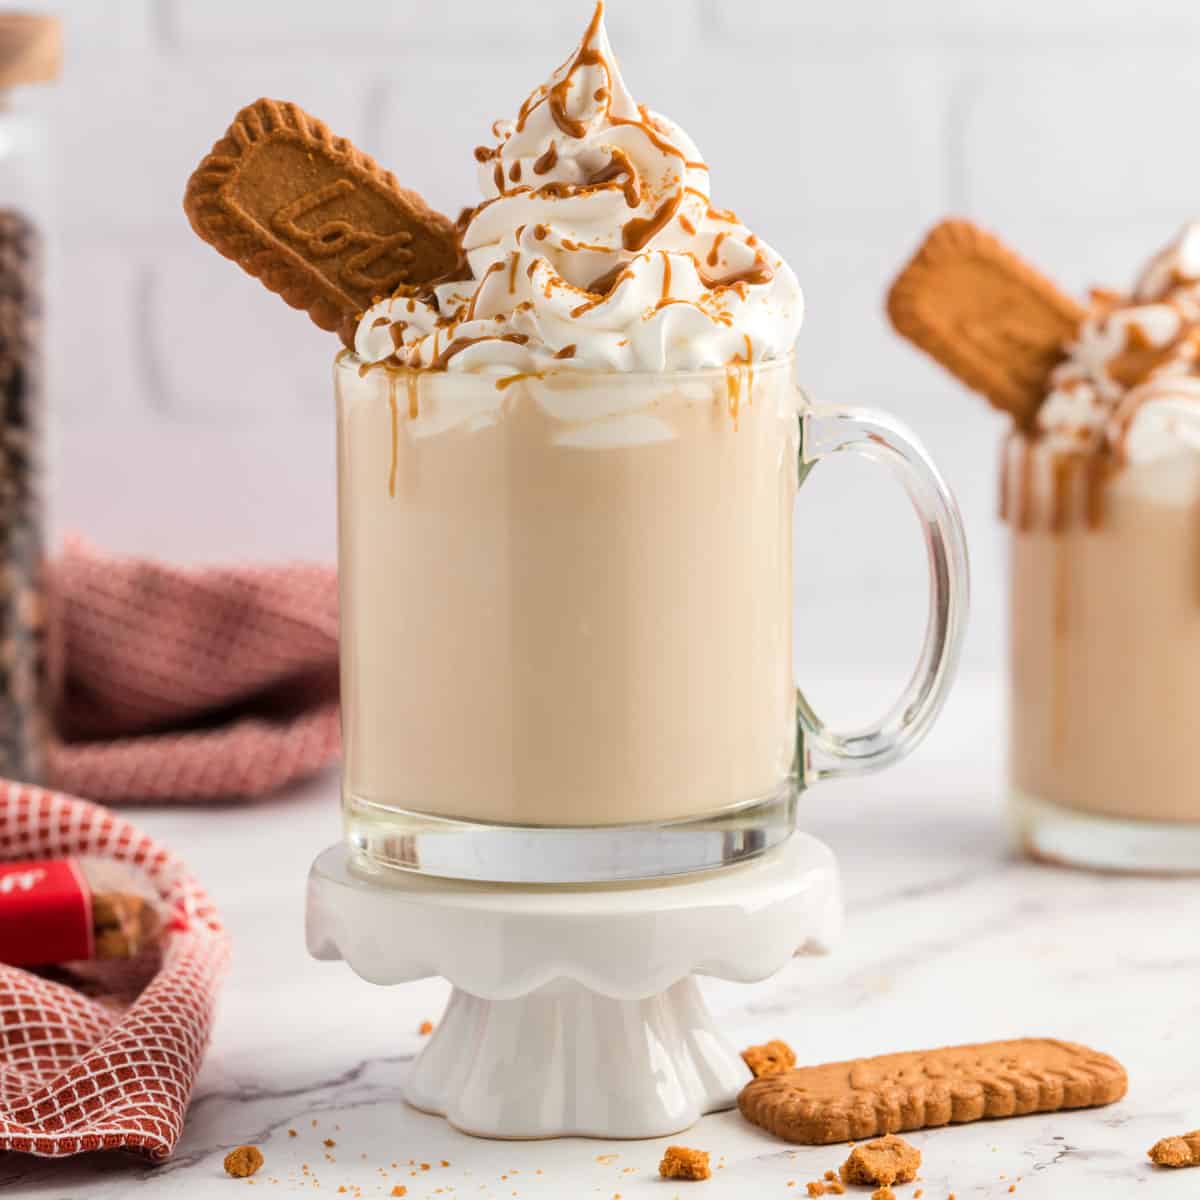 https://www.soulfullymade.com/wp-content/uploads/2022/09/biscoff-cookie-butter-latte-square.jpg